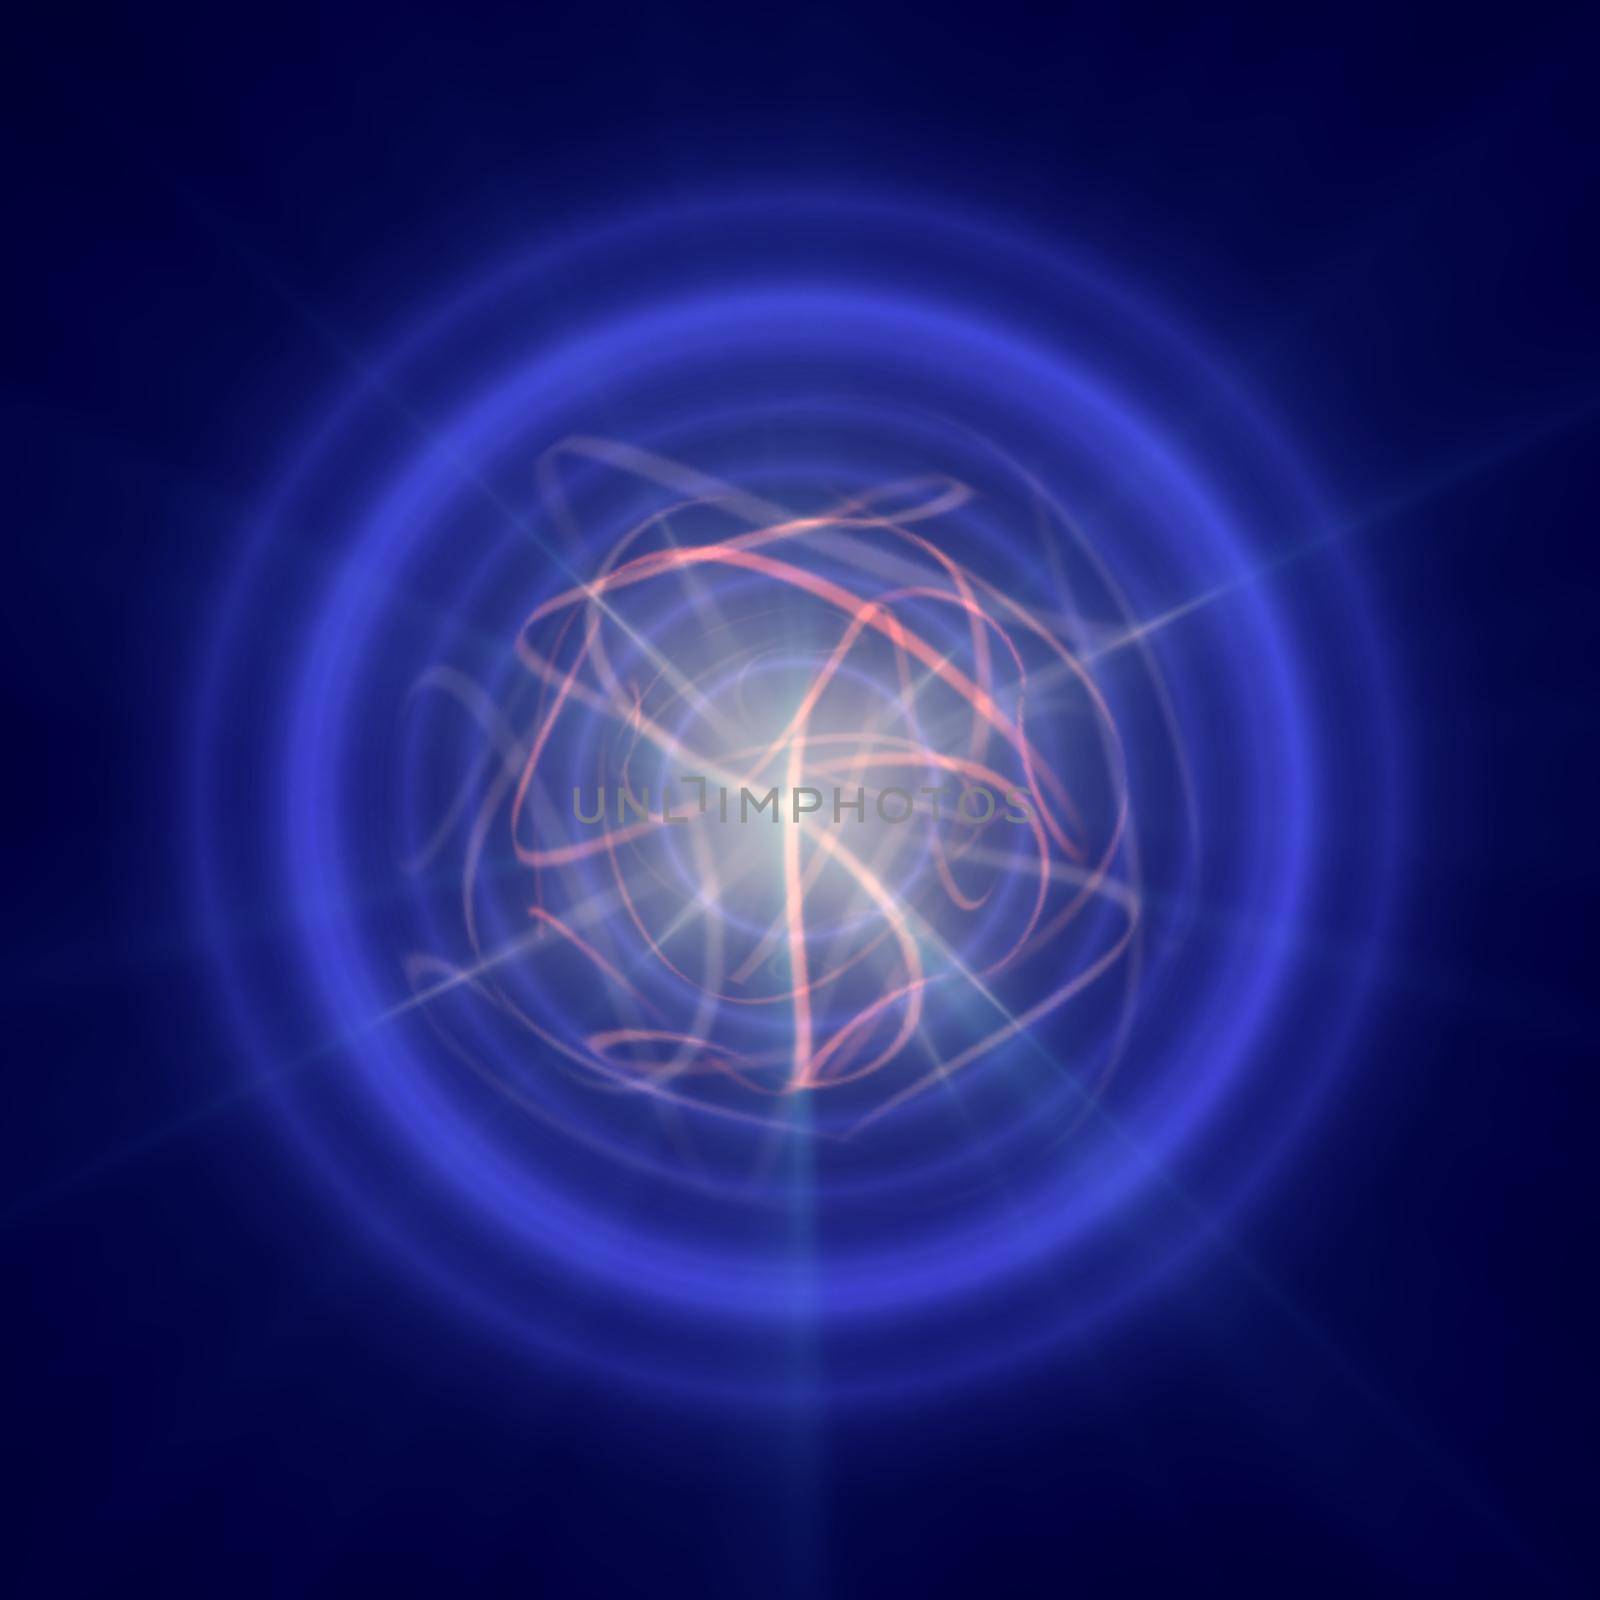 Highly magnetized rotating neutron star, abstract illustration